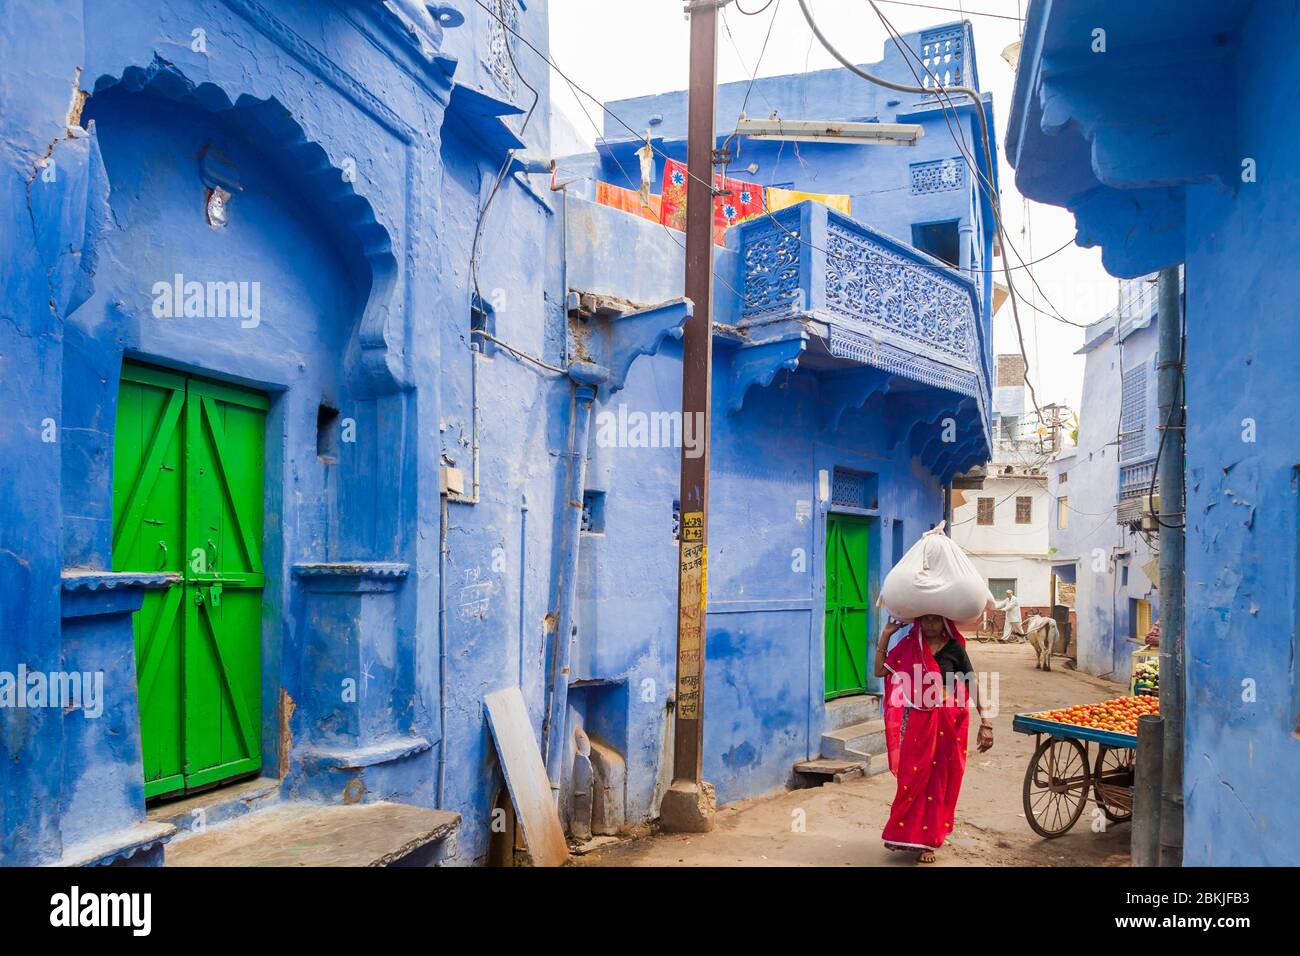 India, Rajasthan, Bundi, woman carrying a bag on her head and dressed with a red sari walking in a blue painted street Stock Photo